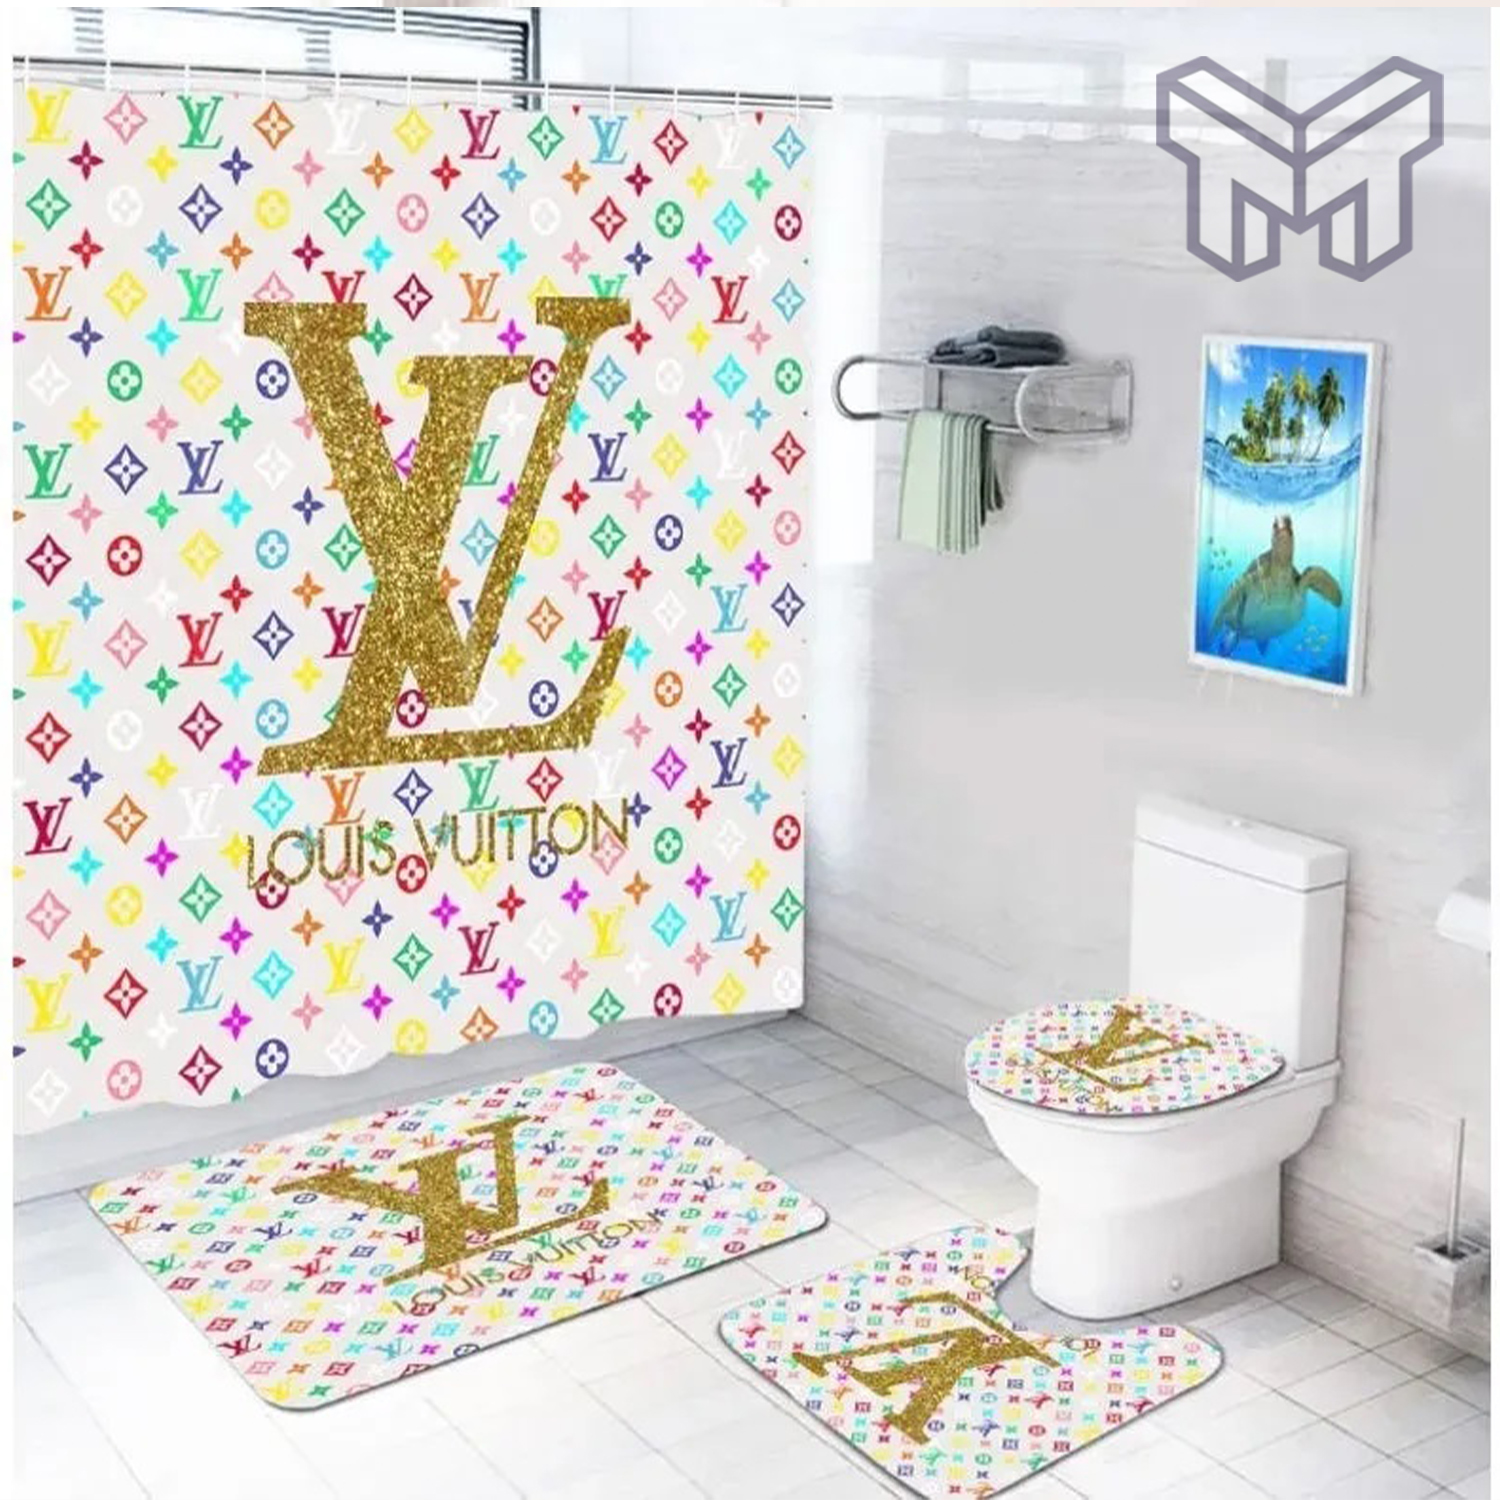 This Louis Vuitton-Themed Bathroom Exists - Racked